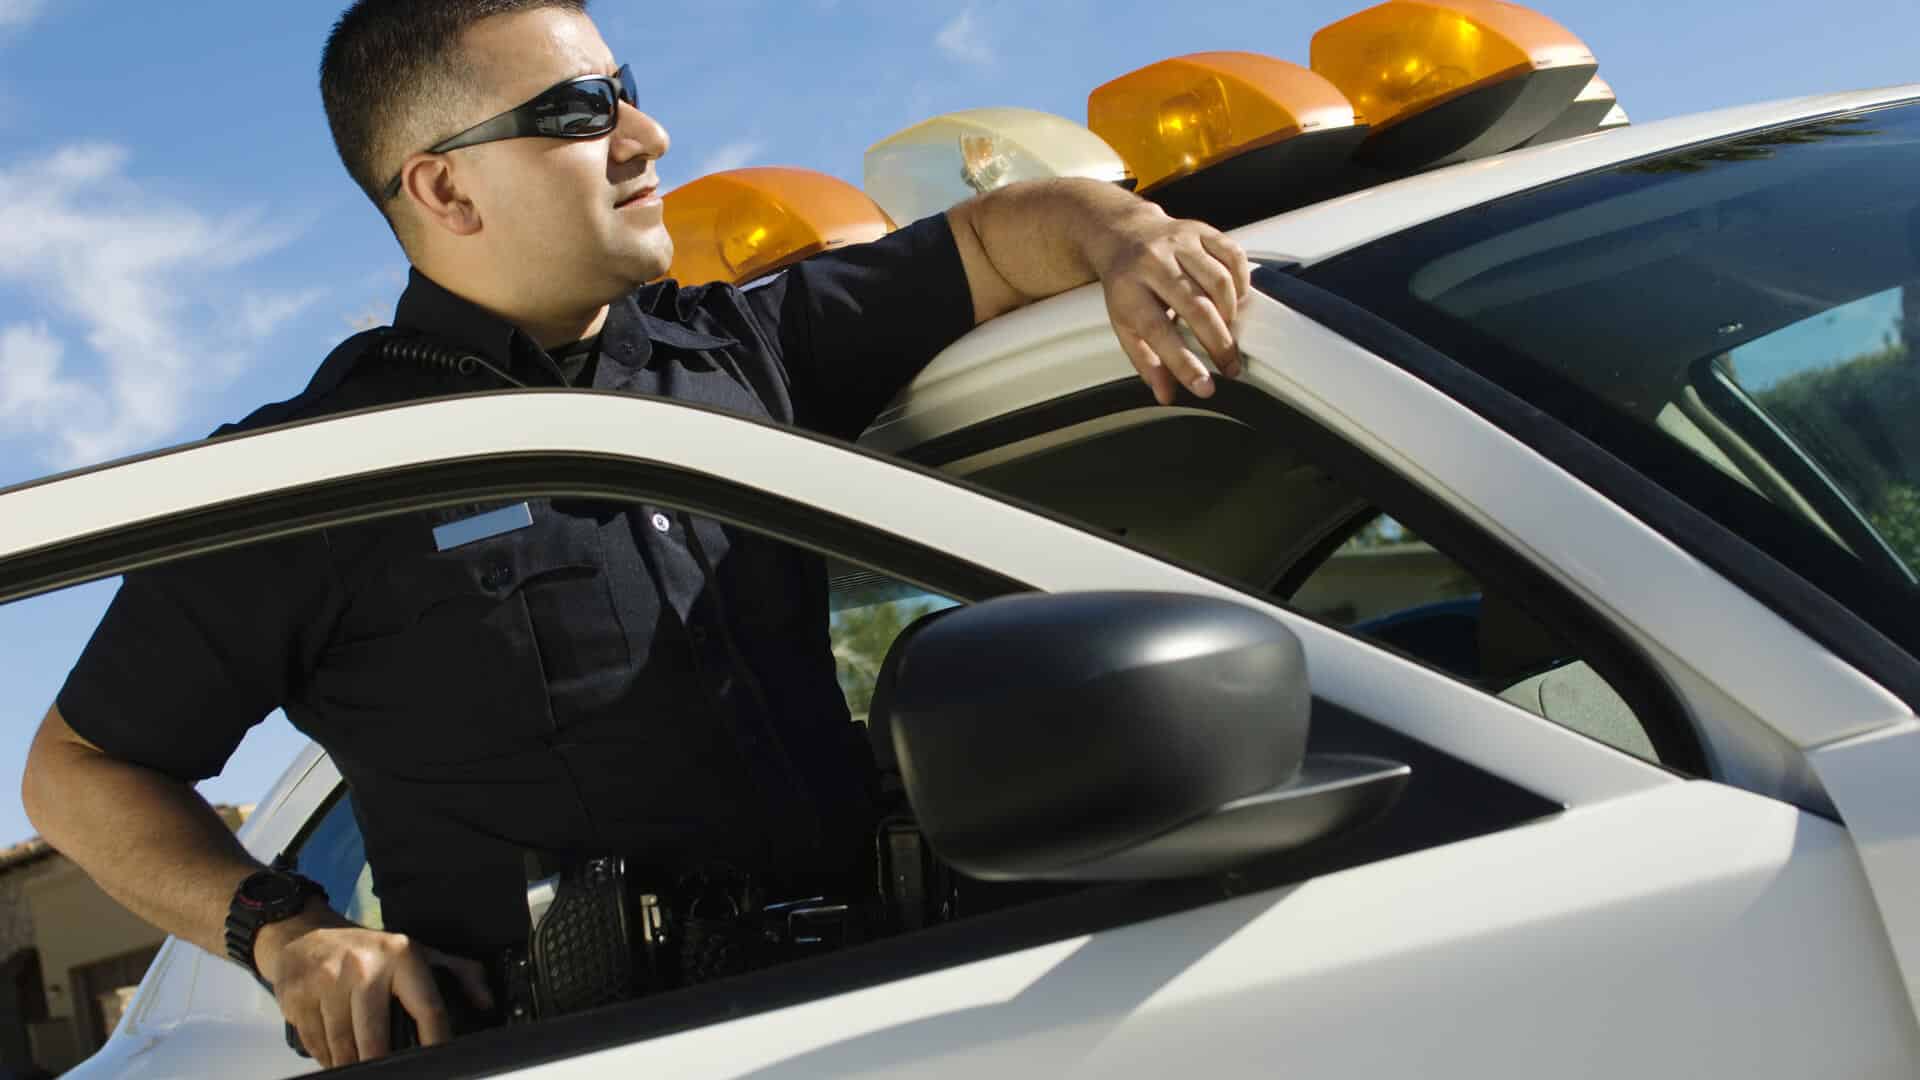 police-officer-leaning-on-patrol-car